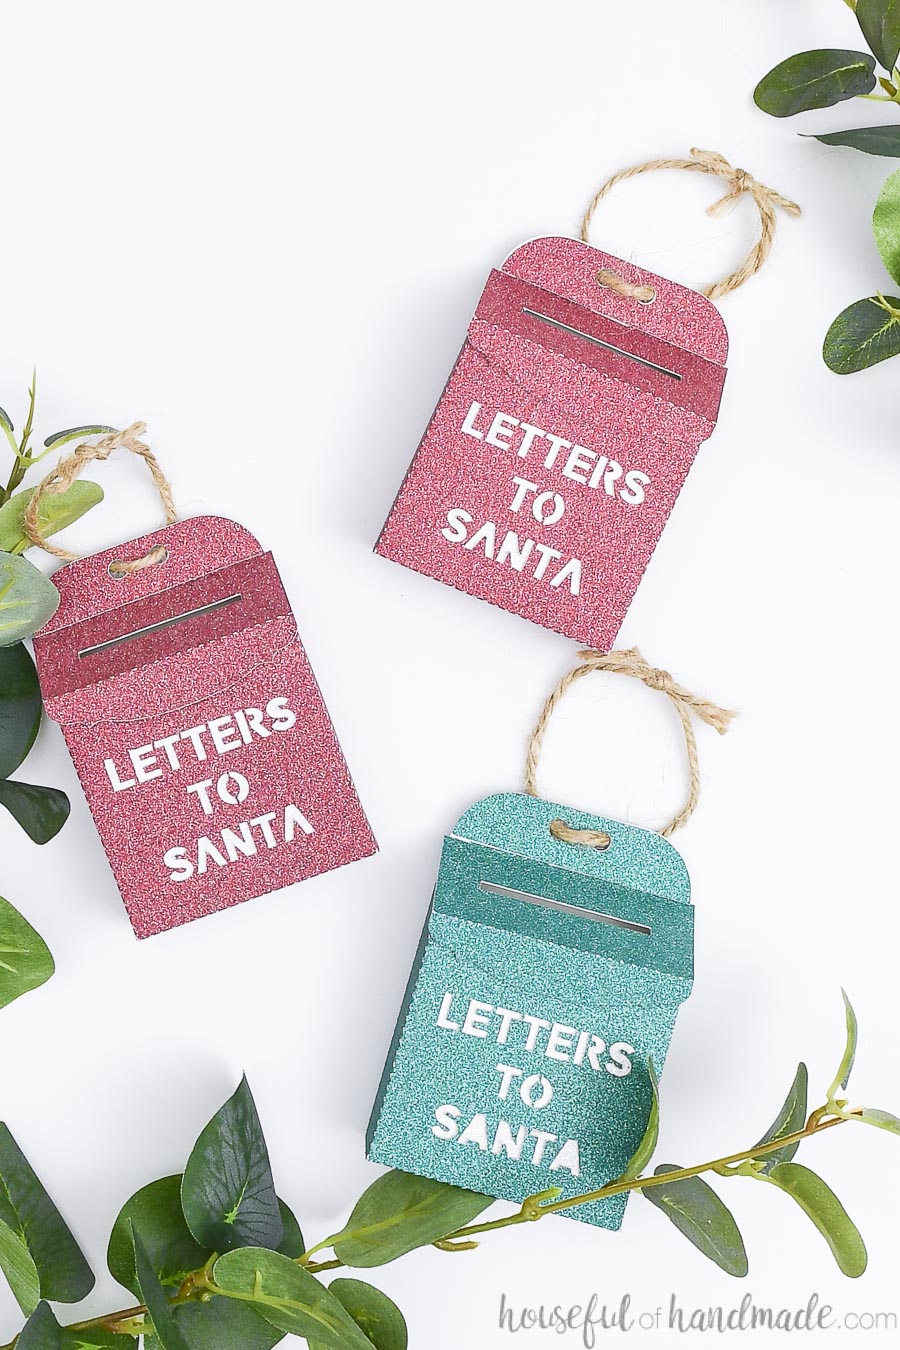 Three glittery Letters to Santa mailbox ornaments on a white background.